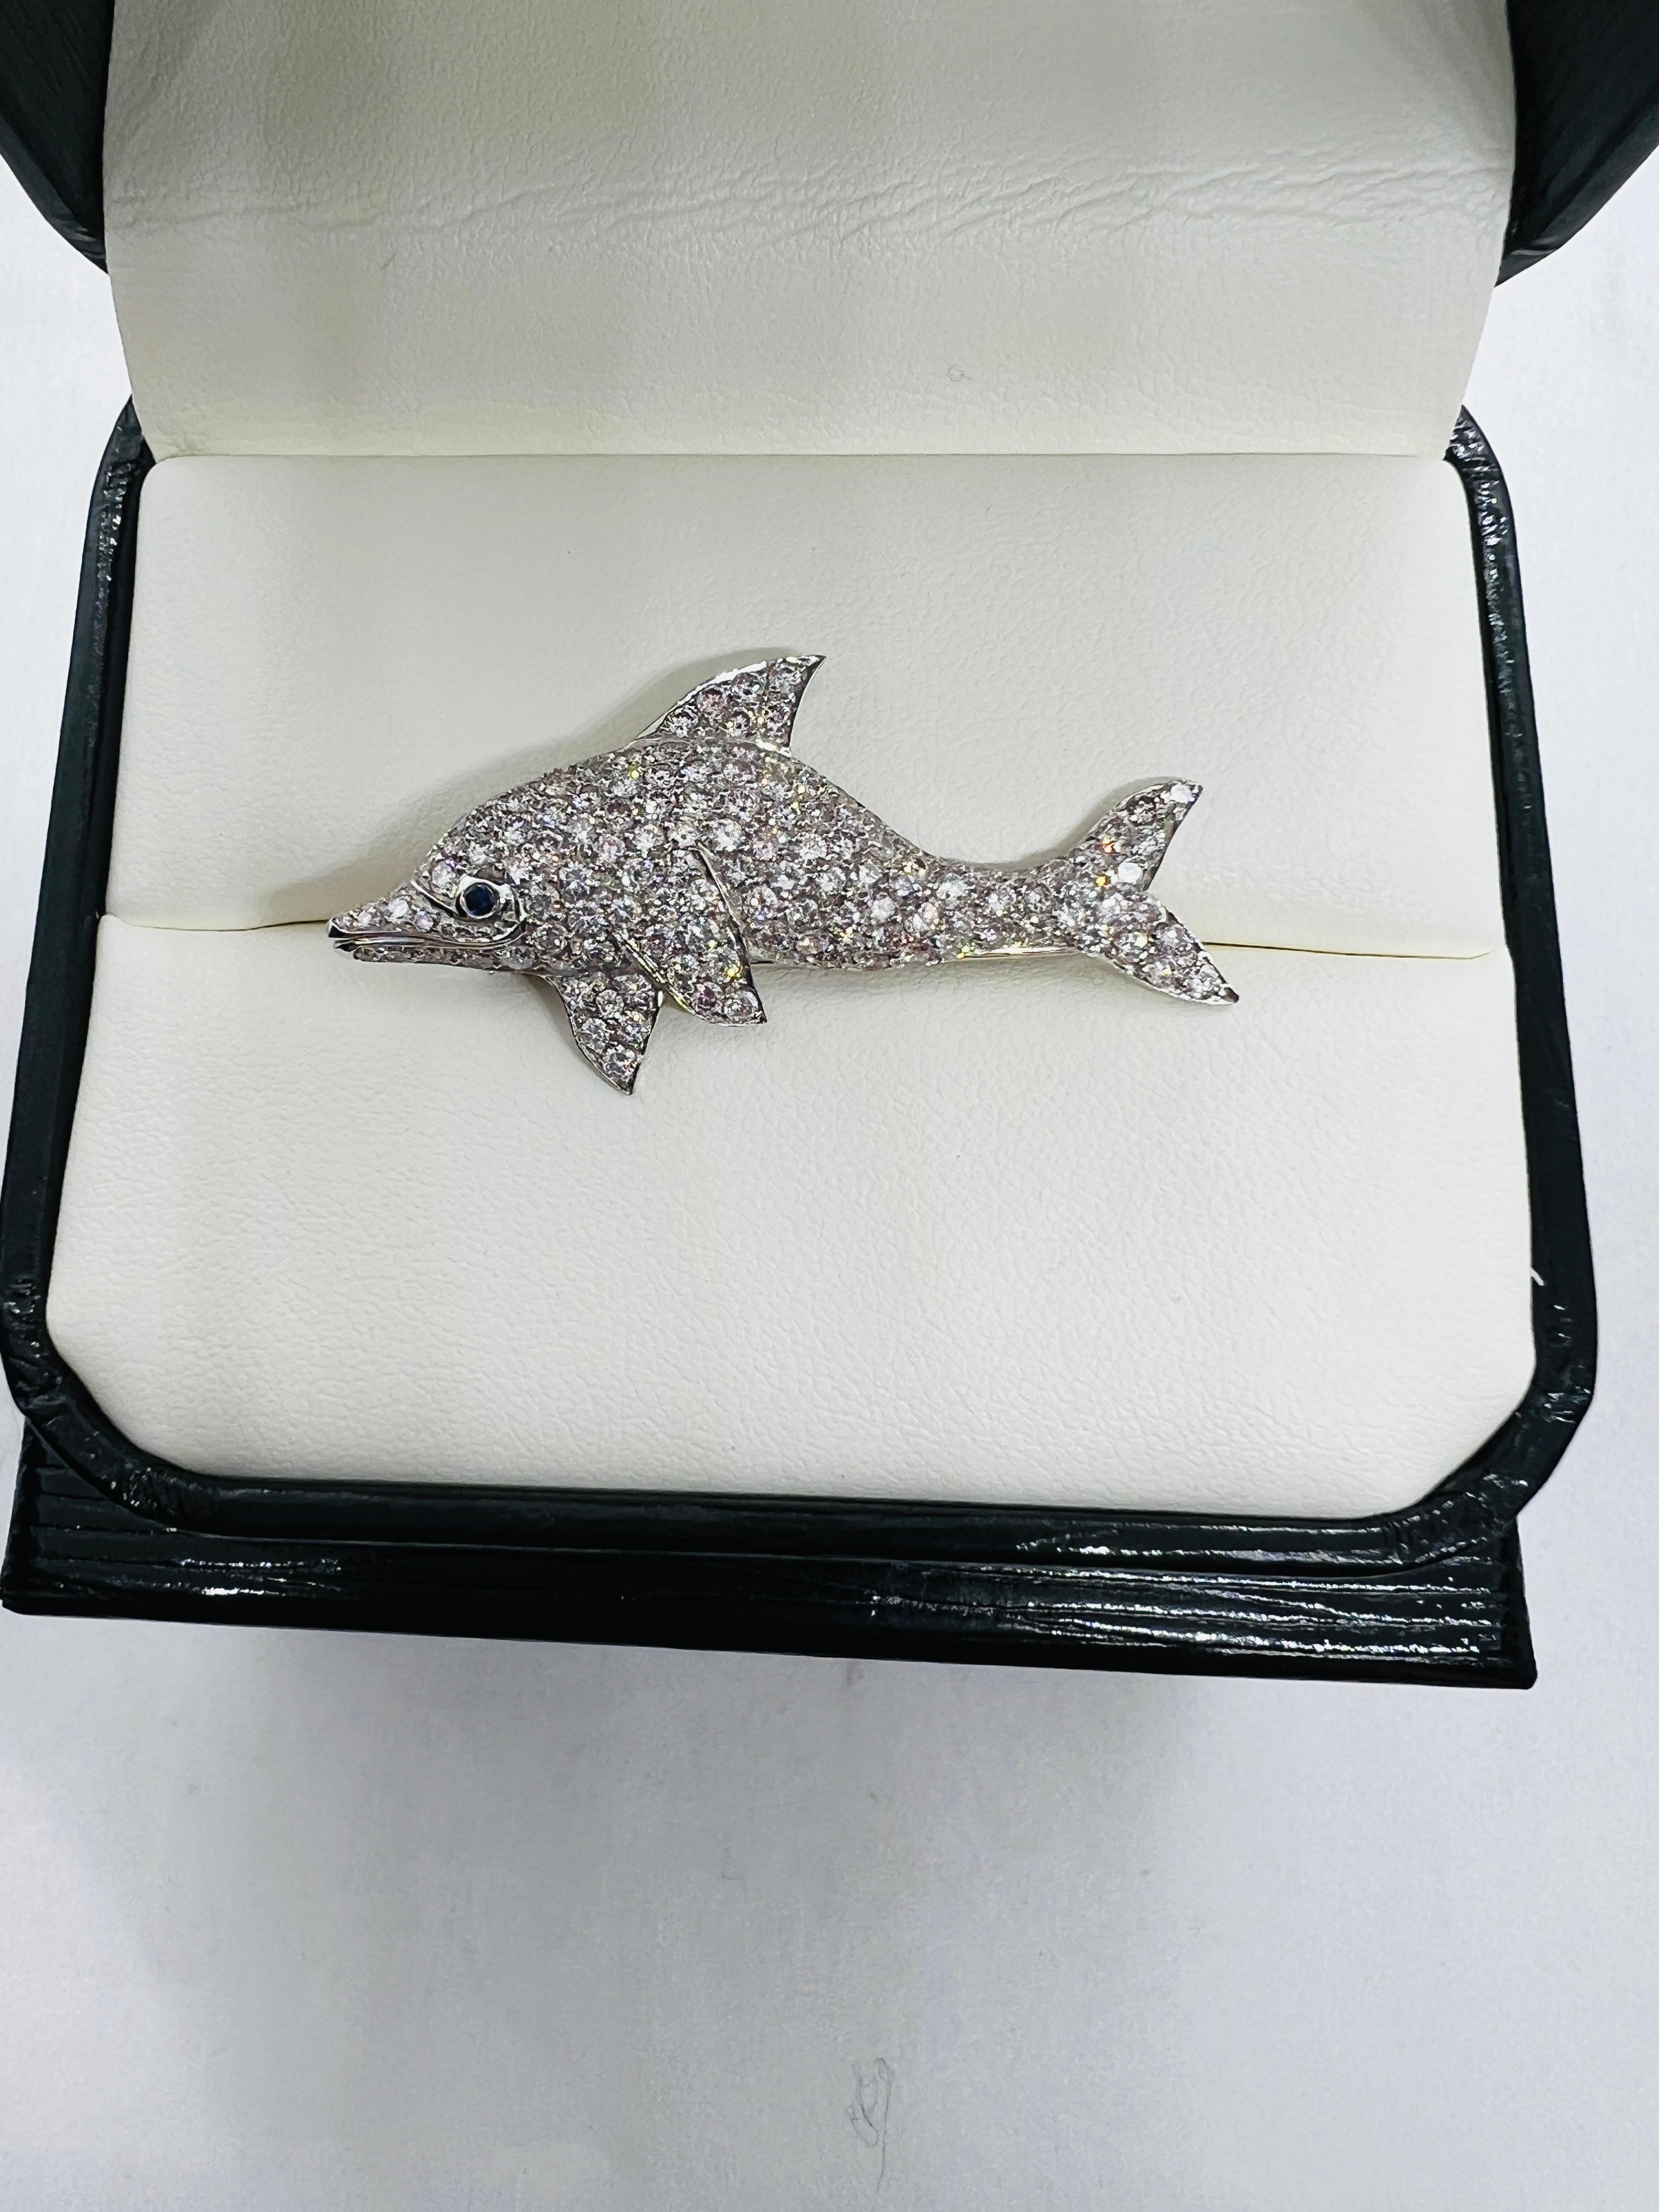 This is a Stunning Dolphin Brooch! Made in Platinum and features two carats of pave set, round , brilliant cut Diamonds. The diamonds are H-I color and Vs clarity. This beauty all features a single Blue Sapphire for the eye. The piece measures 1.5